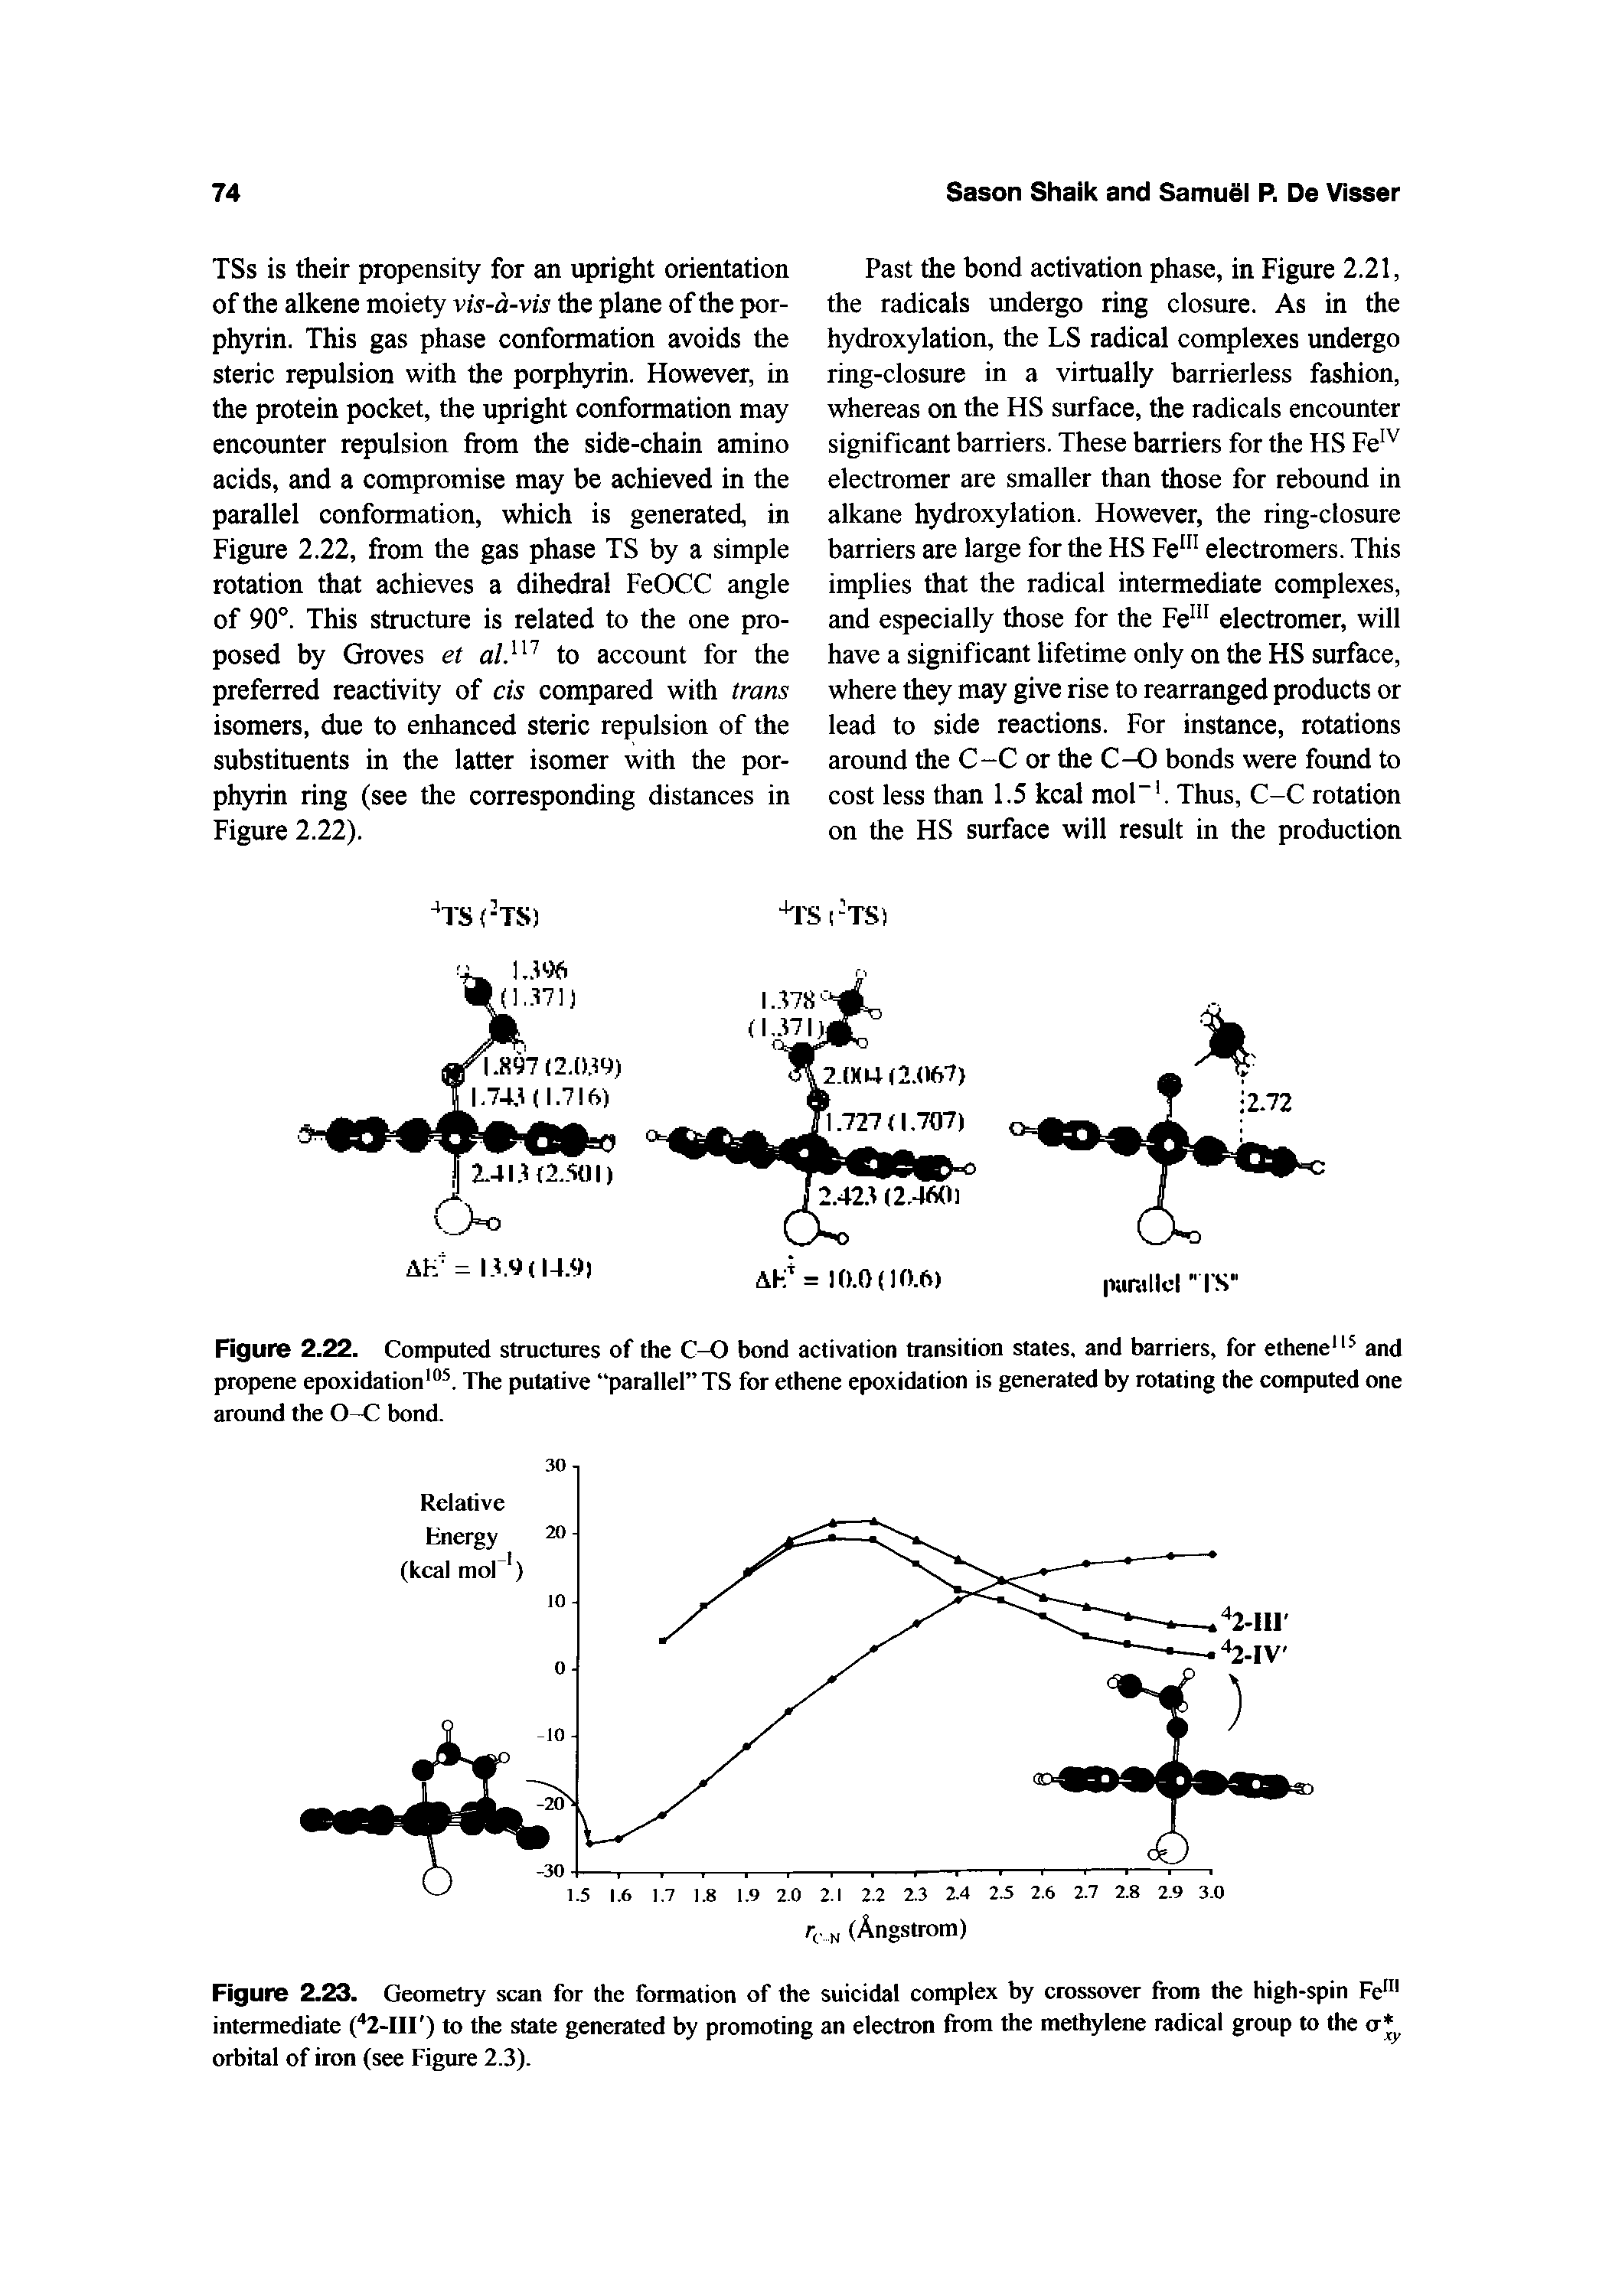 Figure 2.23. Geometry scan for the formation of the suicidal complex by crossover from the high-spin Fe intermediate ( 2-111 ) to the state generated by promoting an electron from the methylene radical group to the orbital of iron (see Figure 2.3).